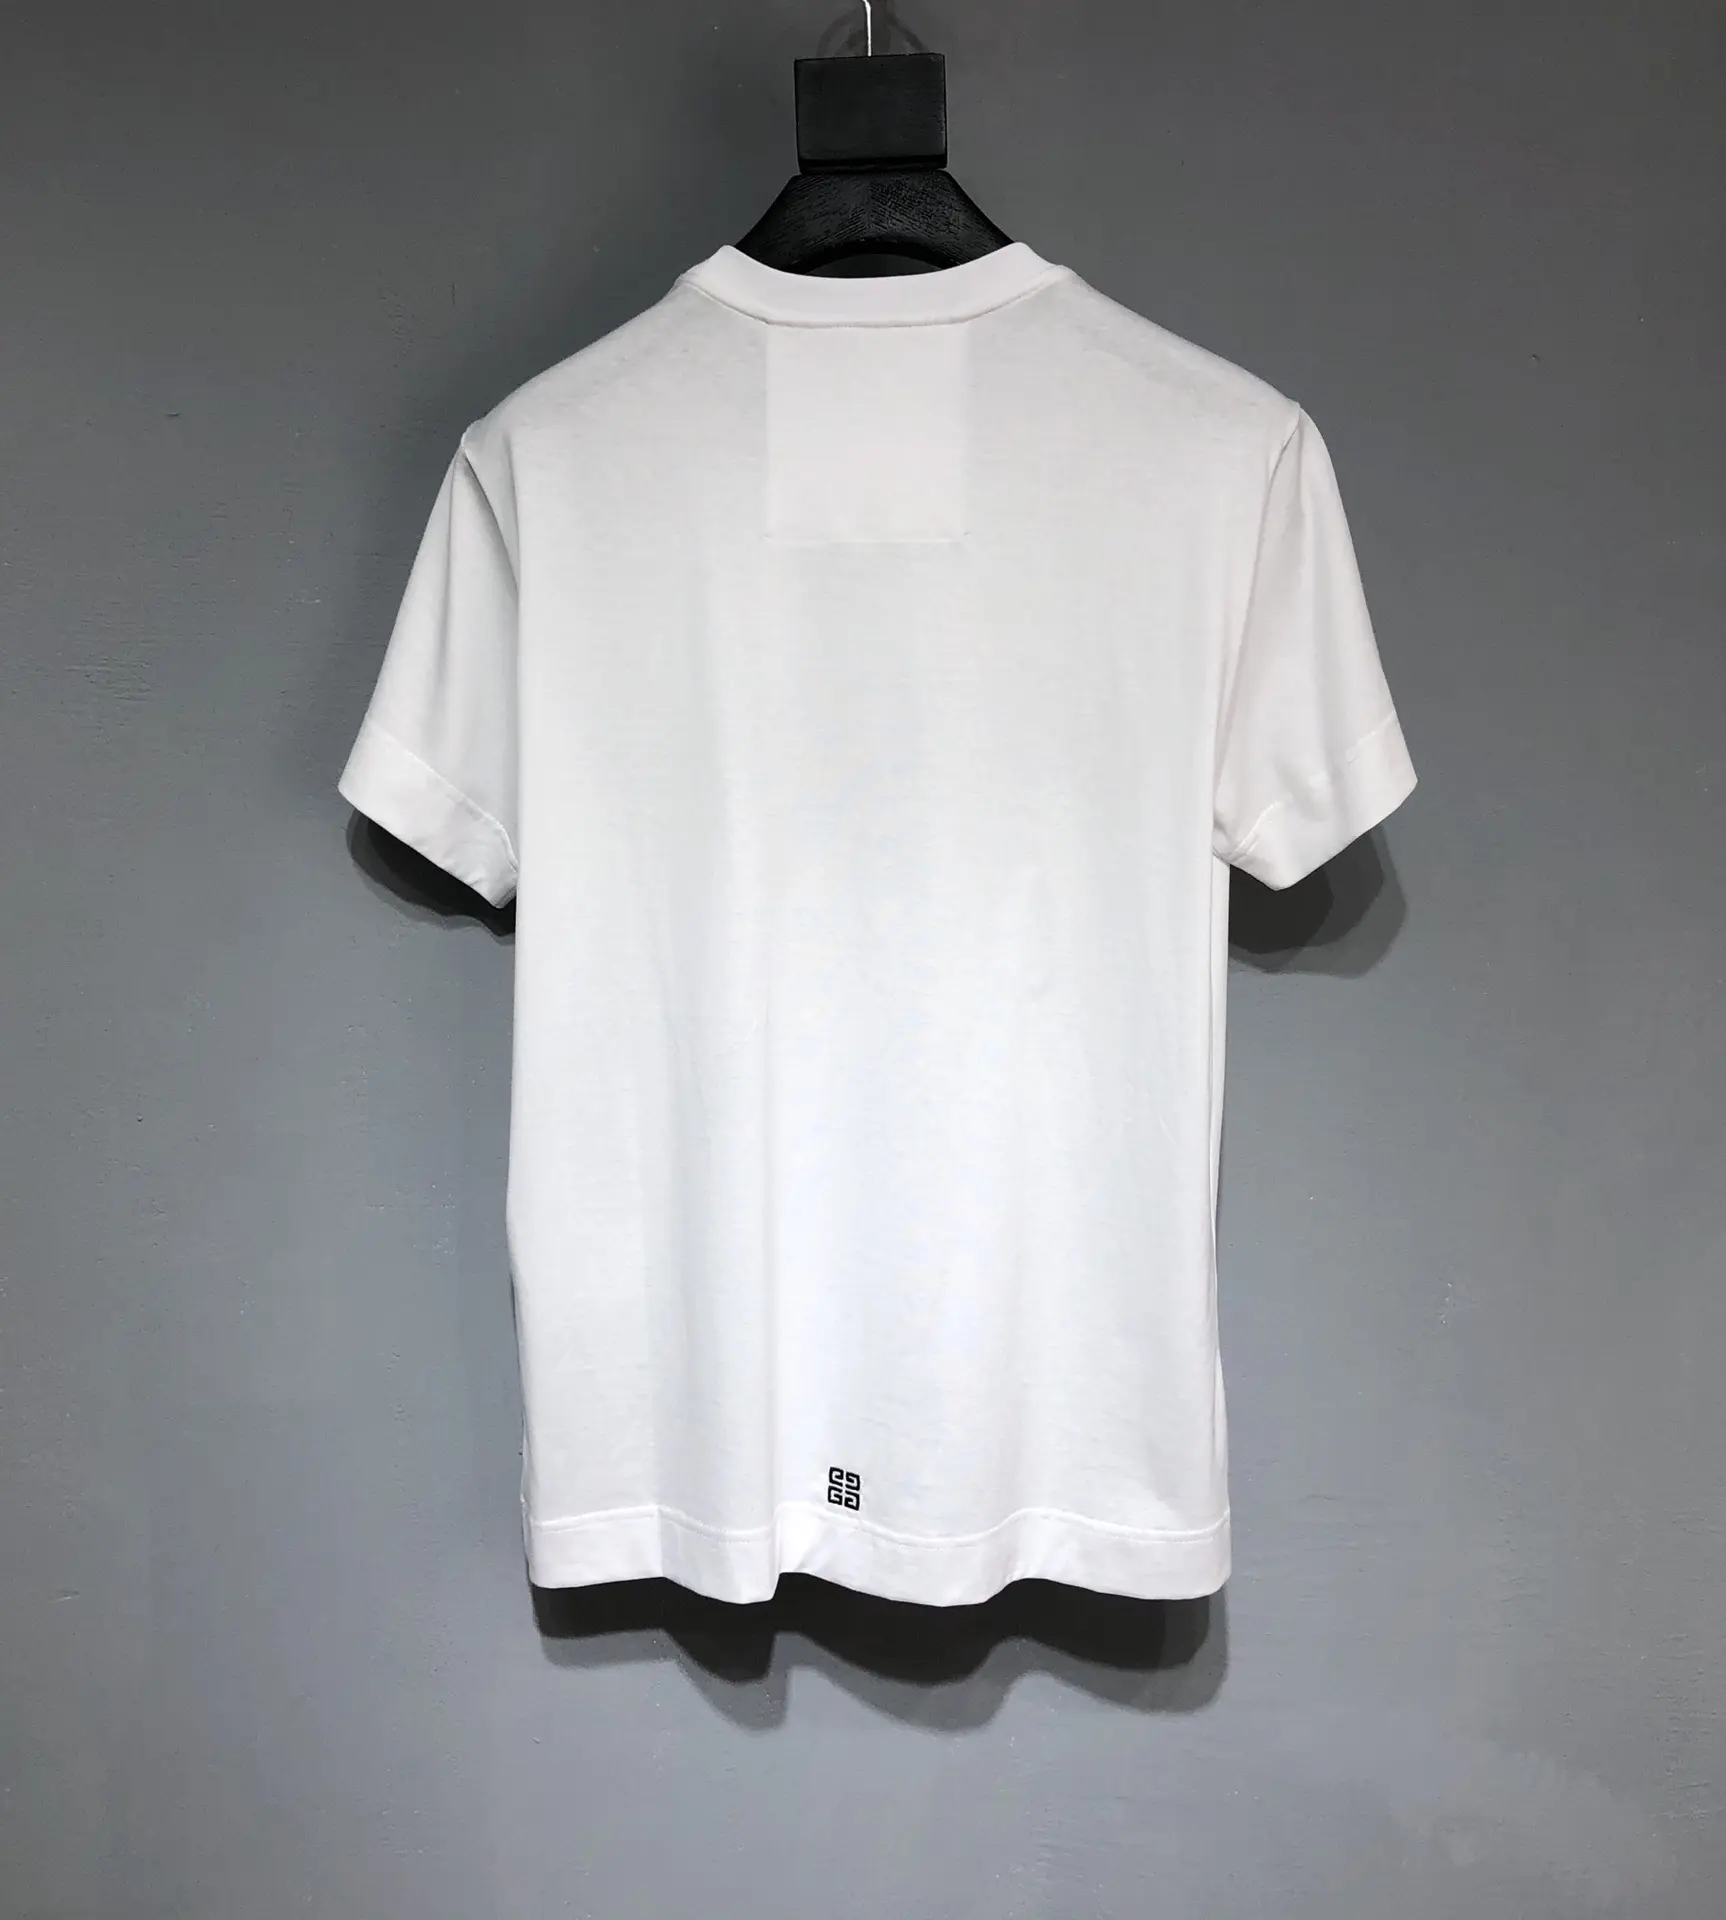 GIVENCHY 2022SS new arrival T-shirt in white